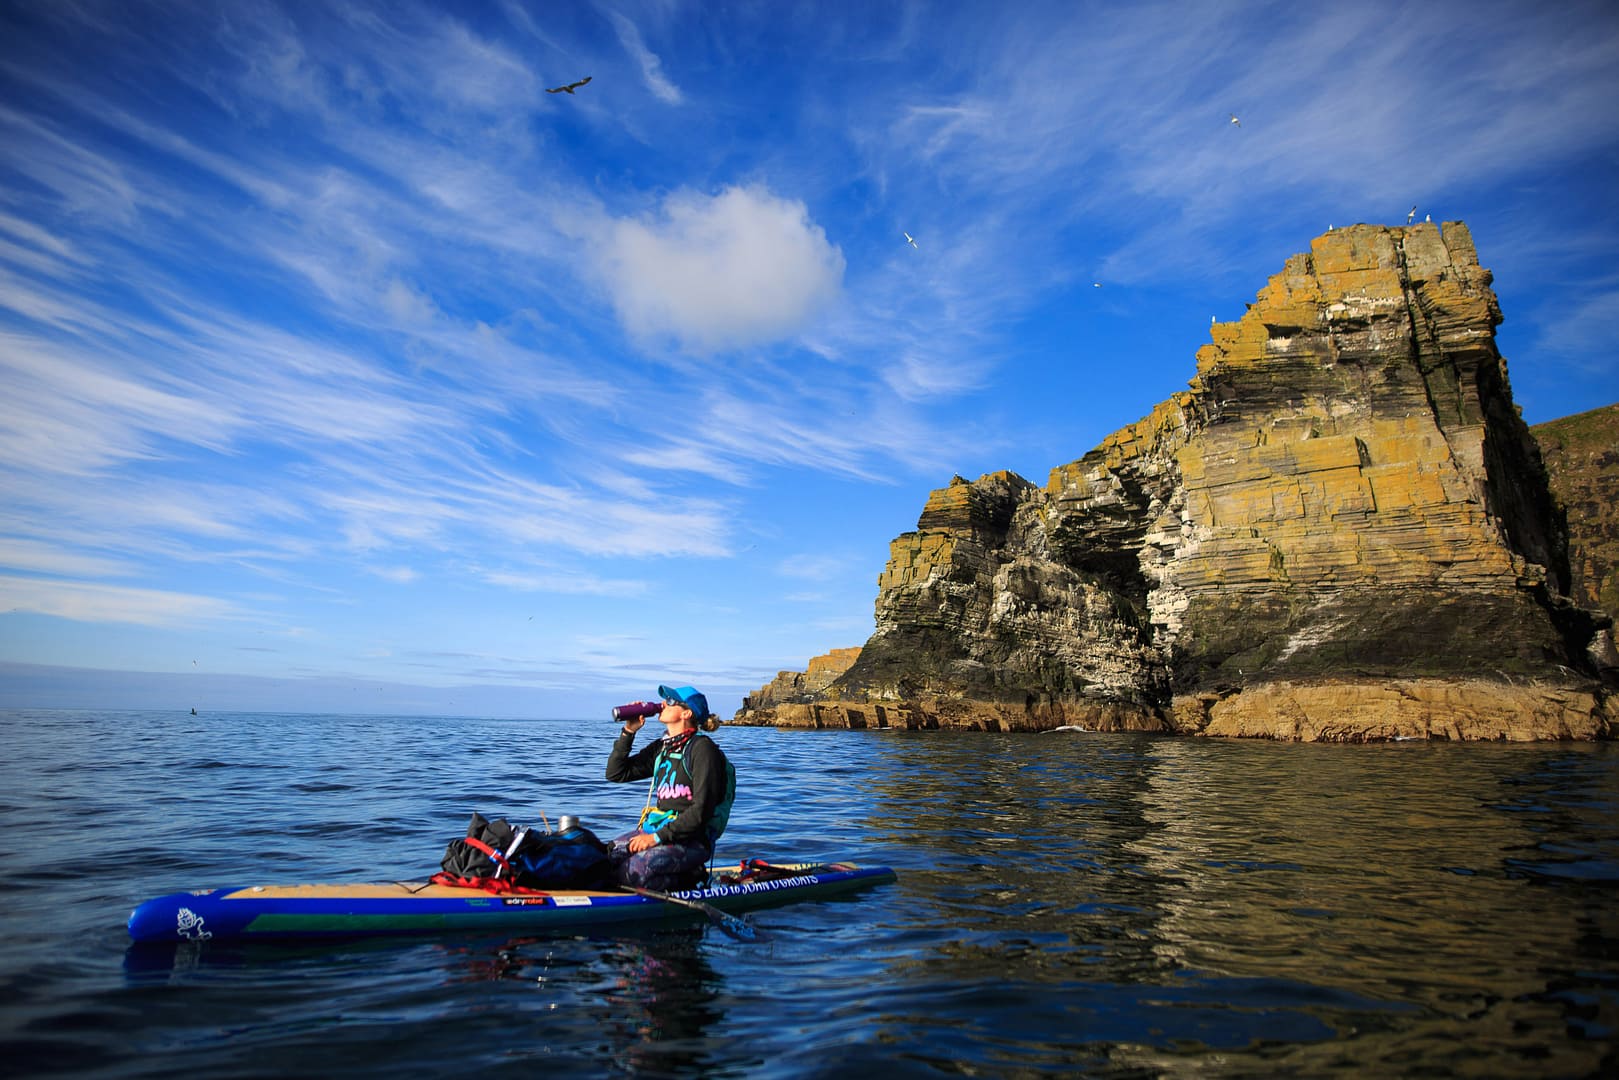 Cal Major, aiming to circumnavigate Scotland by stand-up paddleboard